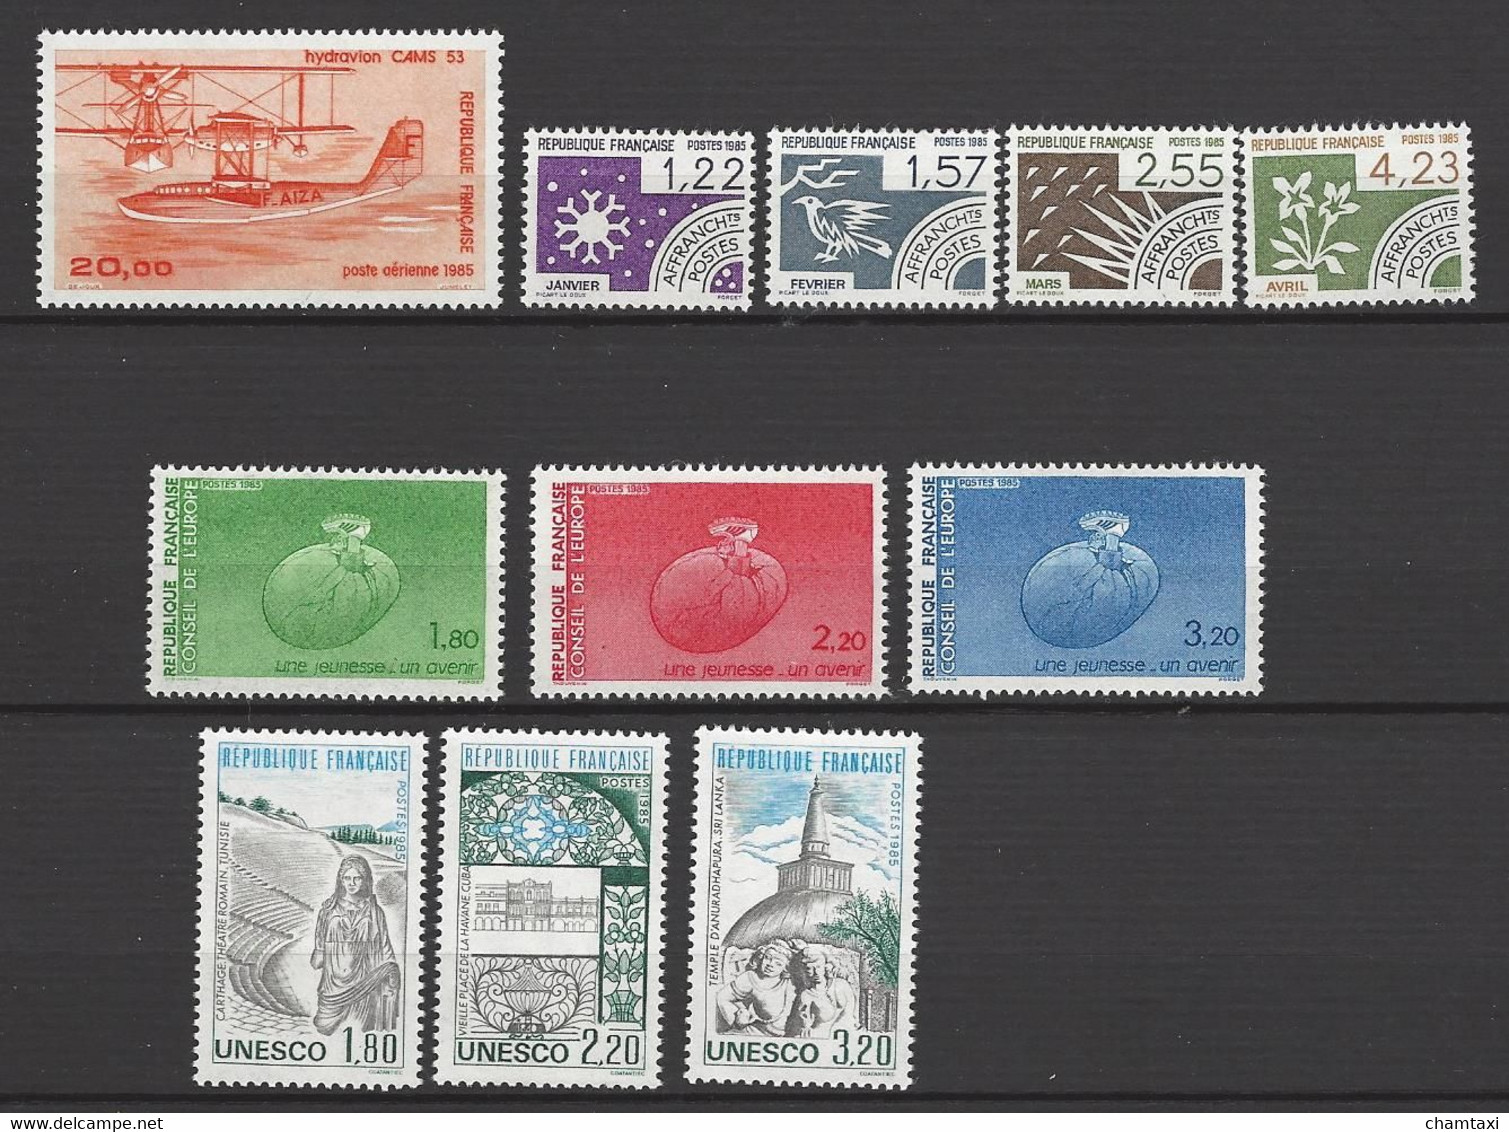 FRANCE 1985 ANNEE COMPLETE 57 TIMBRES PA 58 PREO 186 A 189 TIMBRES SERVICES 85 A 90 + 2 Roulettes 2378b Et 2379b - 1980-1989